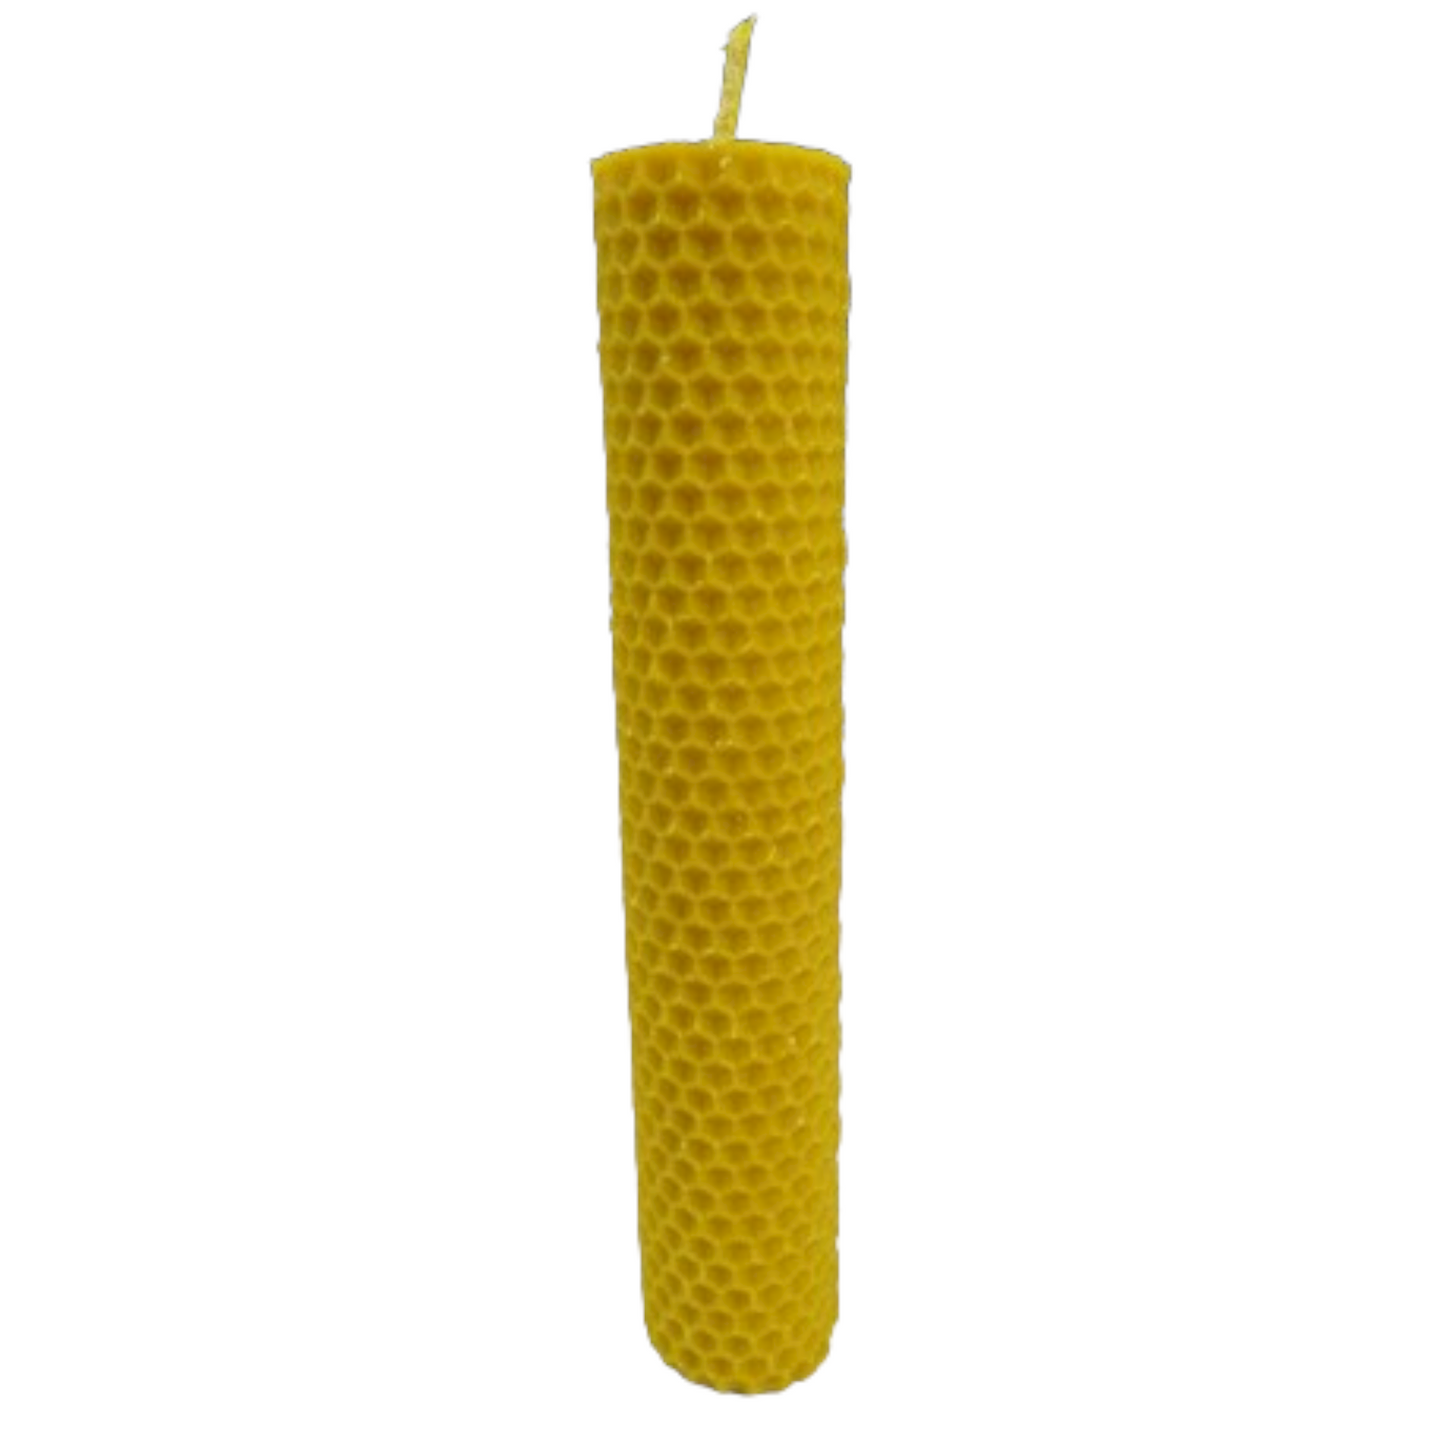 20 x 2 cm natural beeswax candle